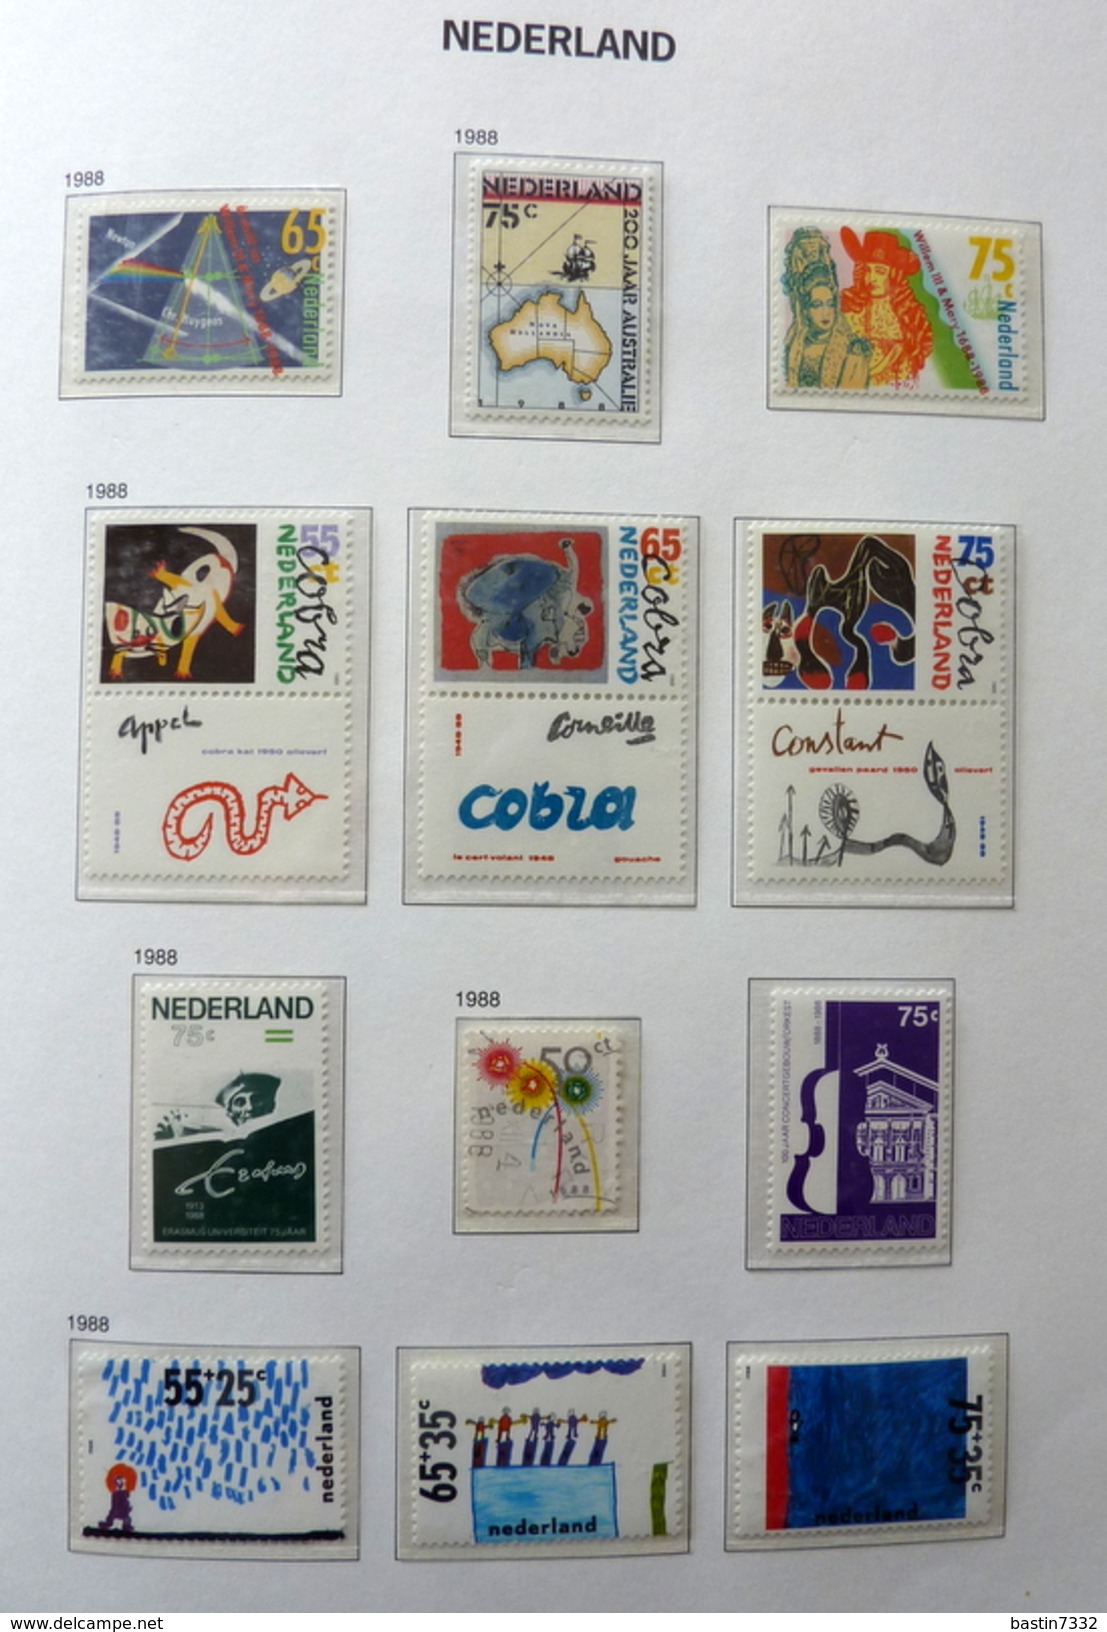 Netherlands/Pays-Bas/Olanda collection in 2 Davo binders